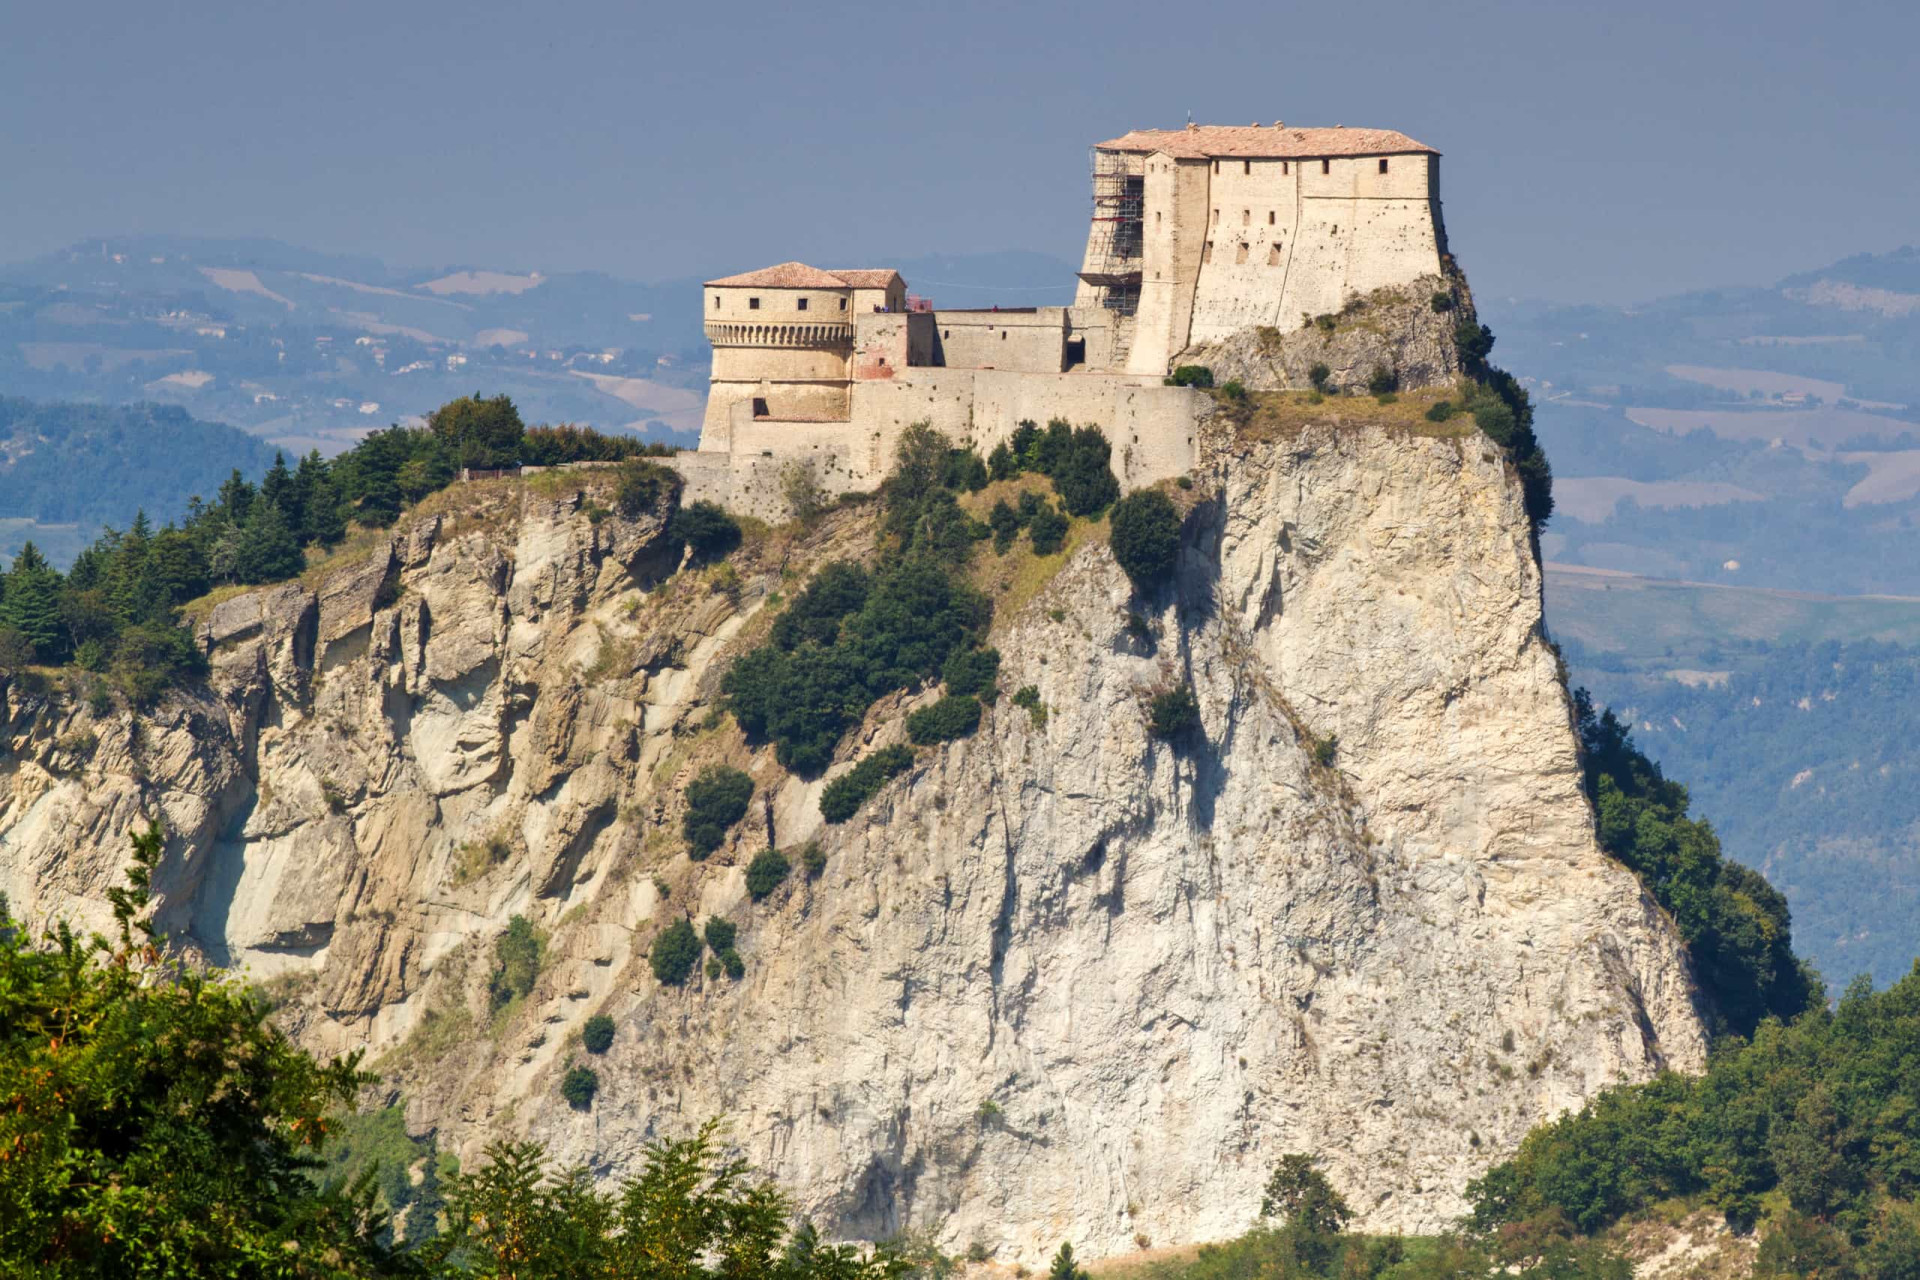 <p>San Leo in Italy's Rimini province is remarkable for its seemingly impregnable fortress, which appears chiseled from the very rock it's landed on.</p><p>You may also like:<a href="https://www.starsinsider.com/n/495971?utm_source=msn.com&utm_medium=display&utm_campaign=referral_description&utm_content=481361v4en-en_selected"> Radioactive facts about uranium</a></p>